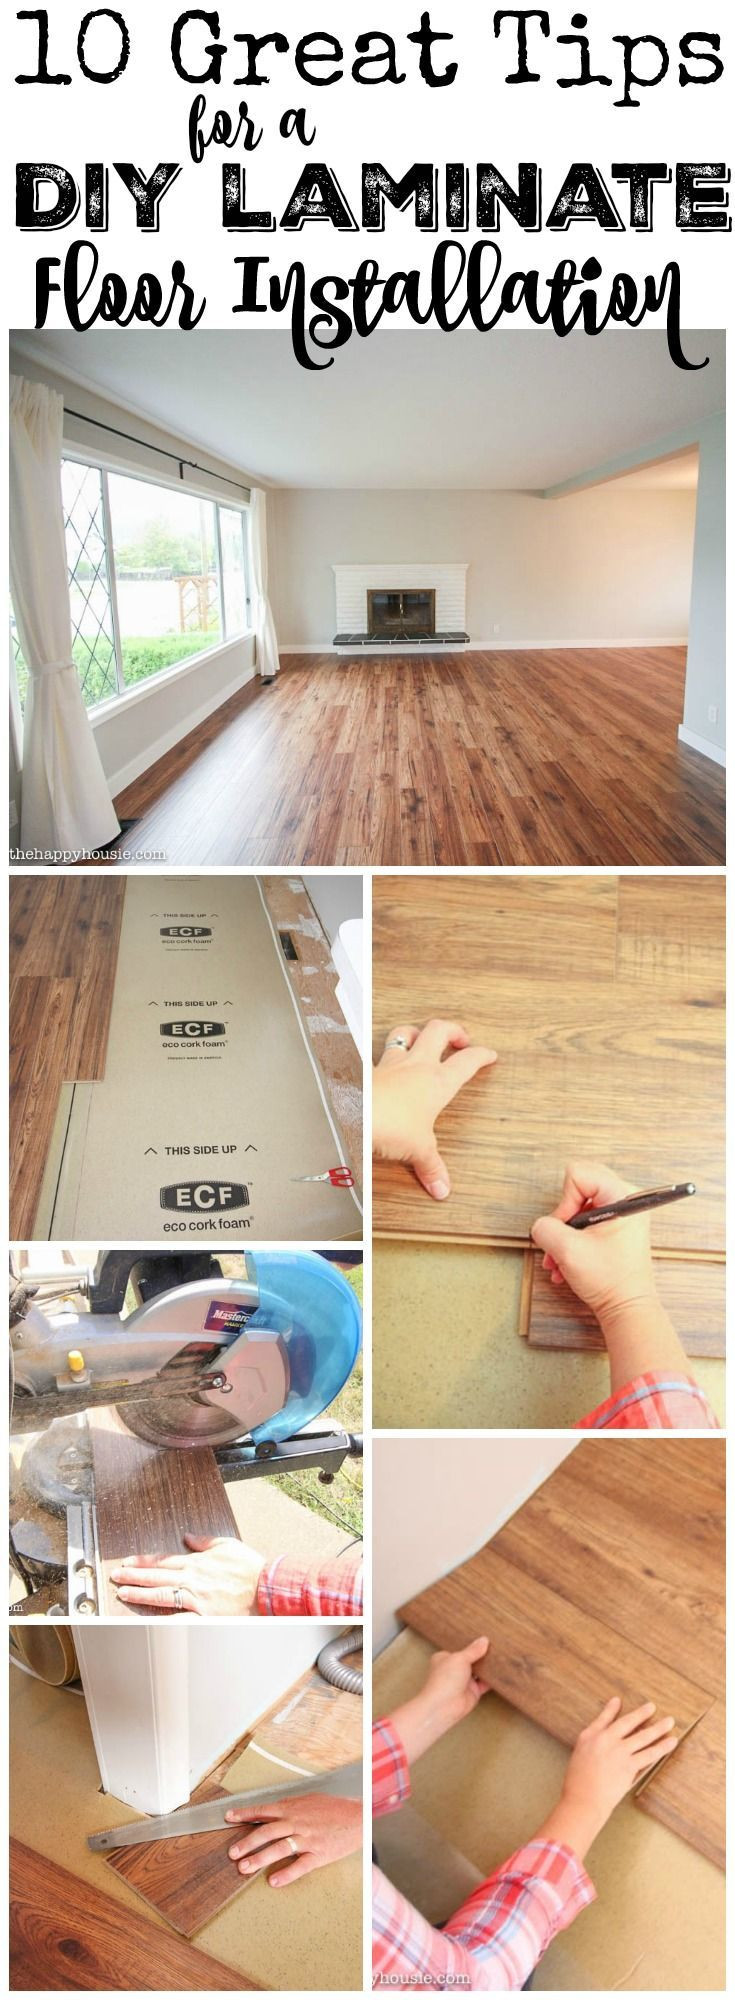 16 Unique Hardwood Floor Refinishing Concord Nh 2024 free download hardwood floor refinishing concord nh of 25 best parket images by kiya on pinterest flooring ideas floors regarding 10 great tips for a diy laminate floor installation at thehappyhousie com